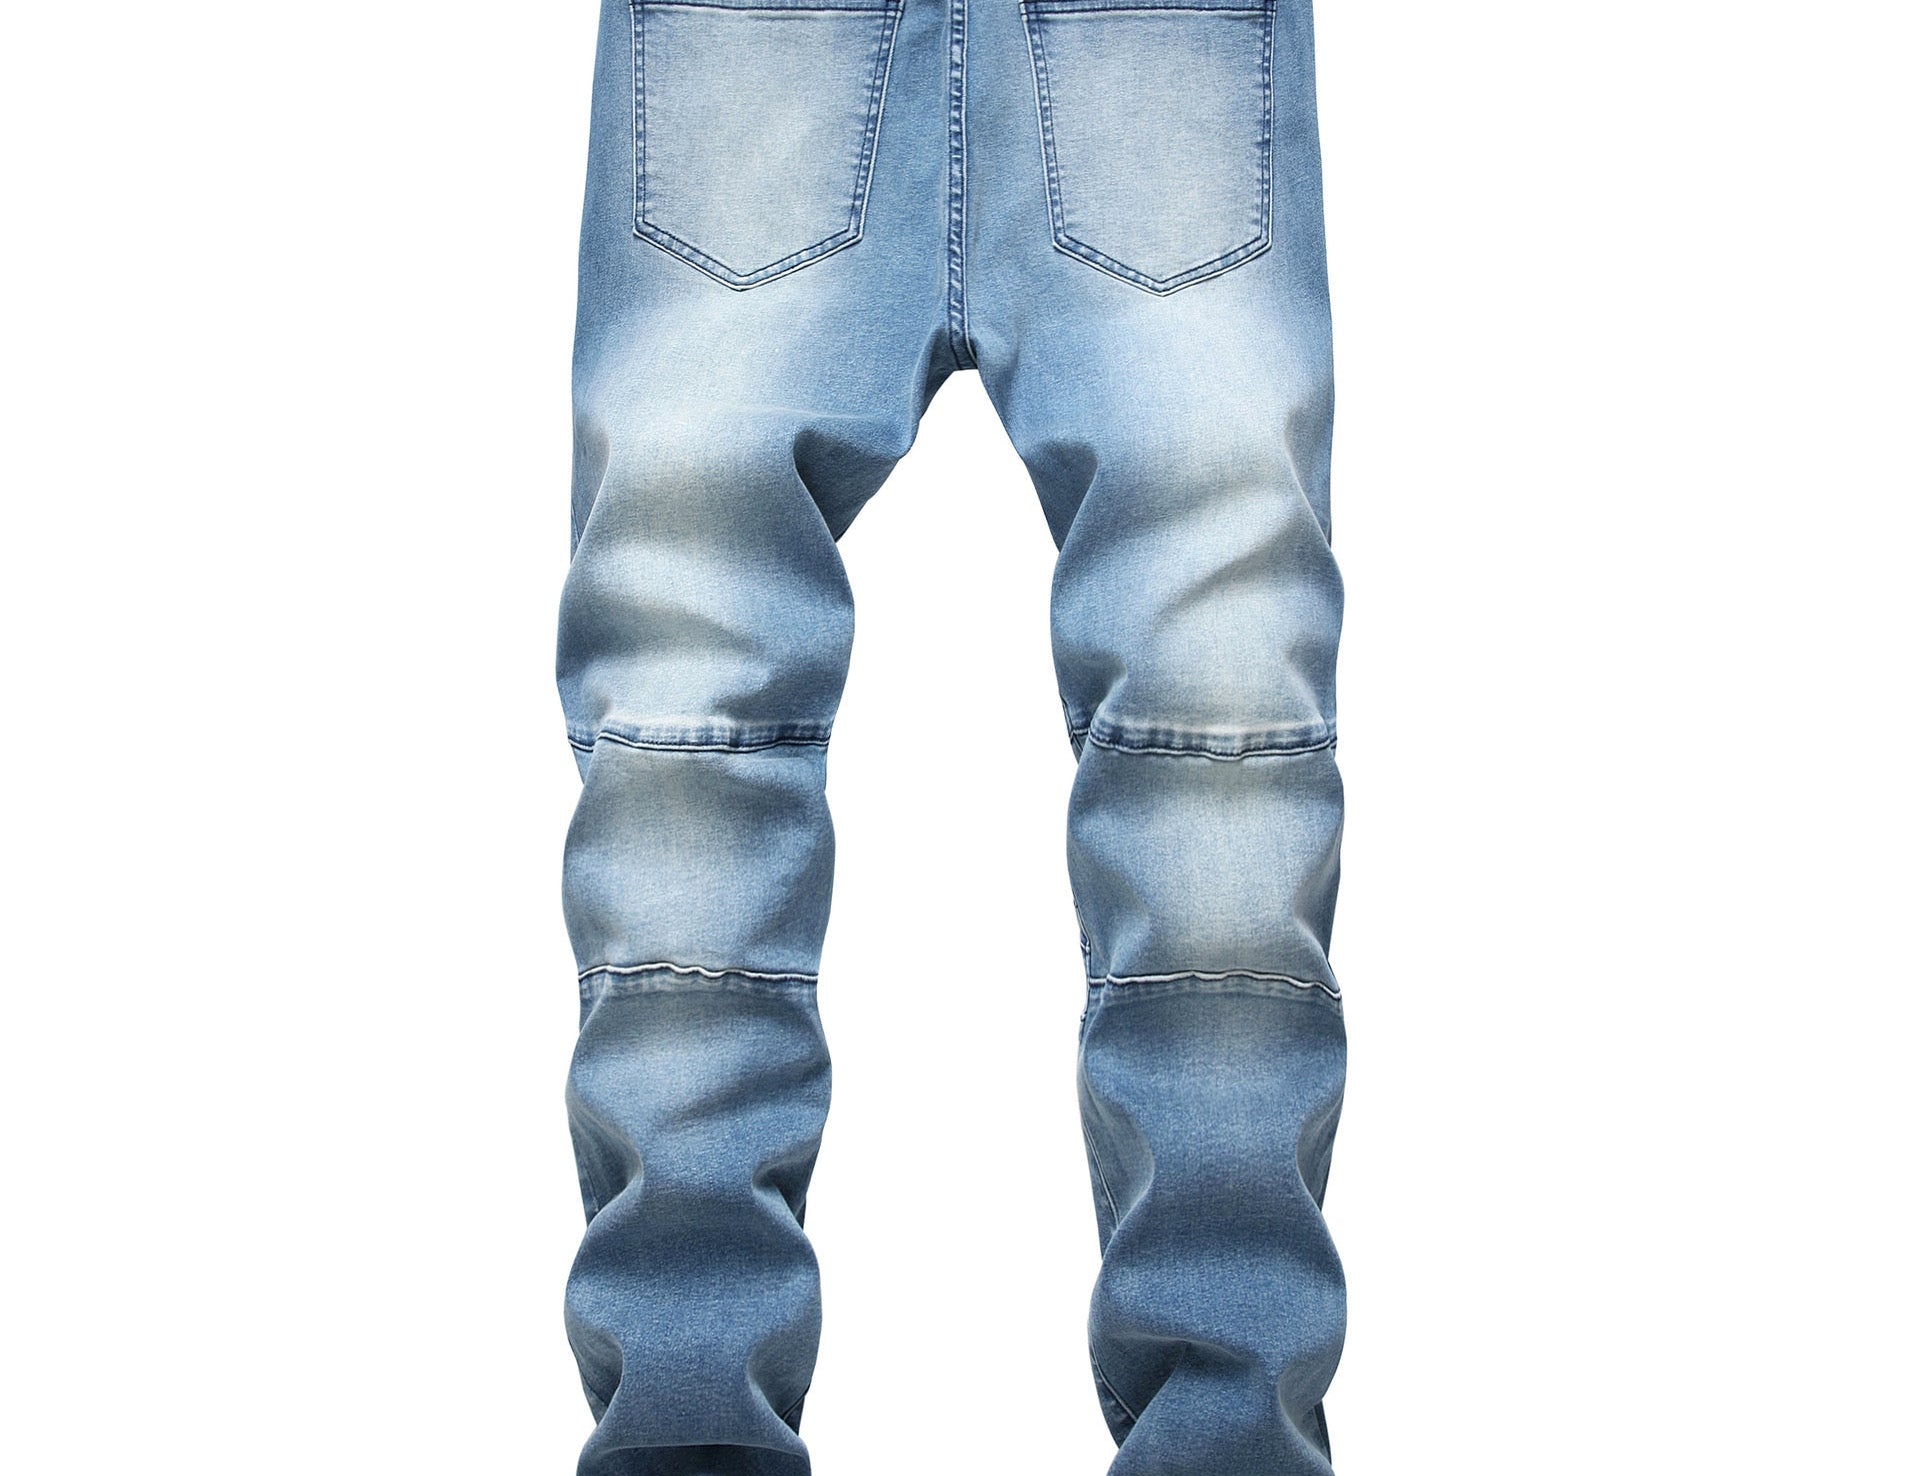 VHUU - Denim Jeans for Men - Sarman Fashion - Wholesale Clothing Fashion Brand for Men from Canada